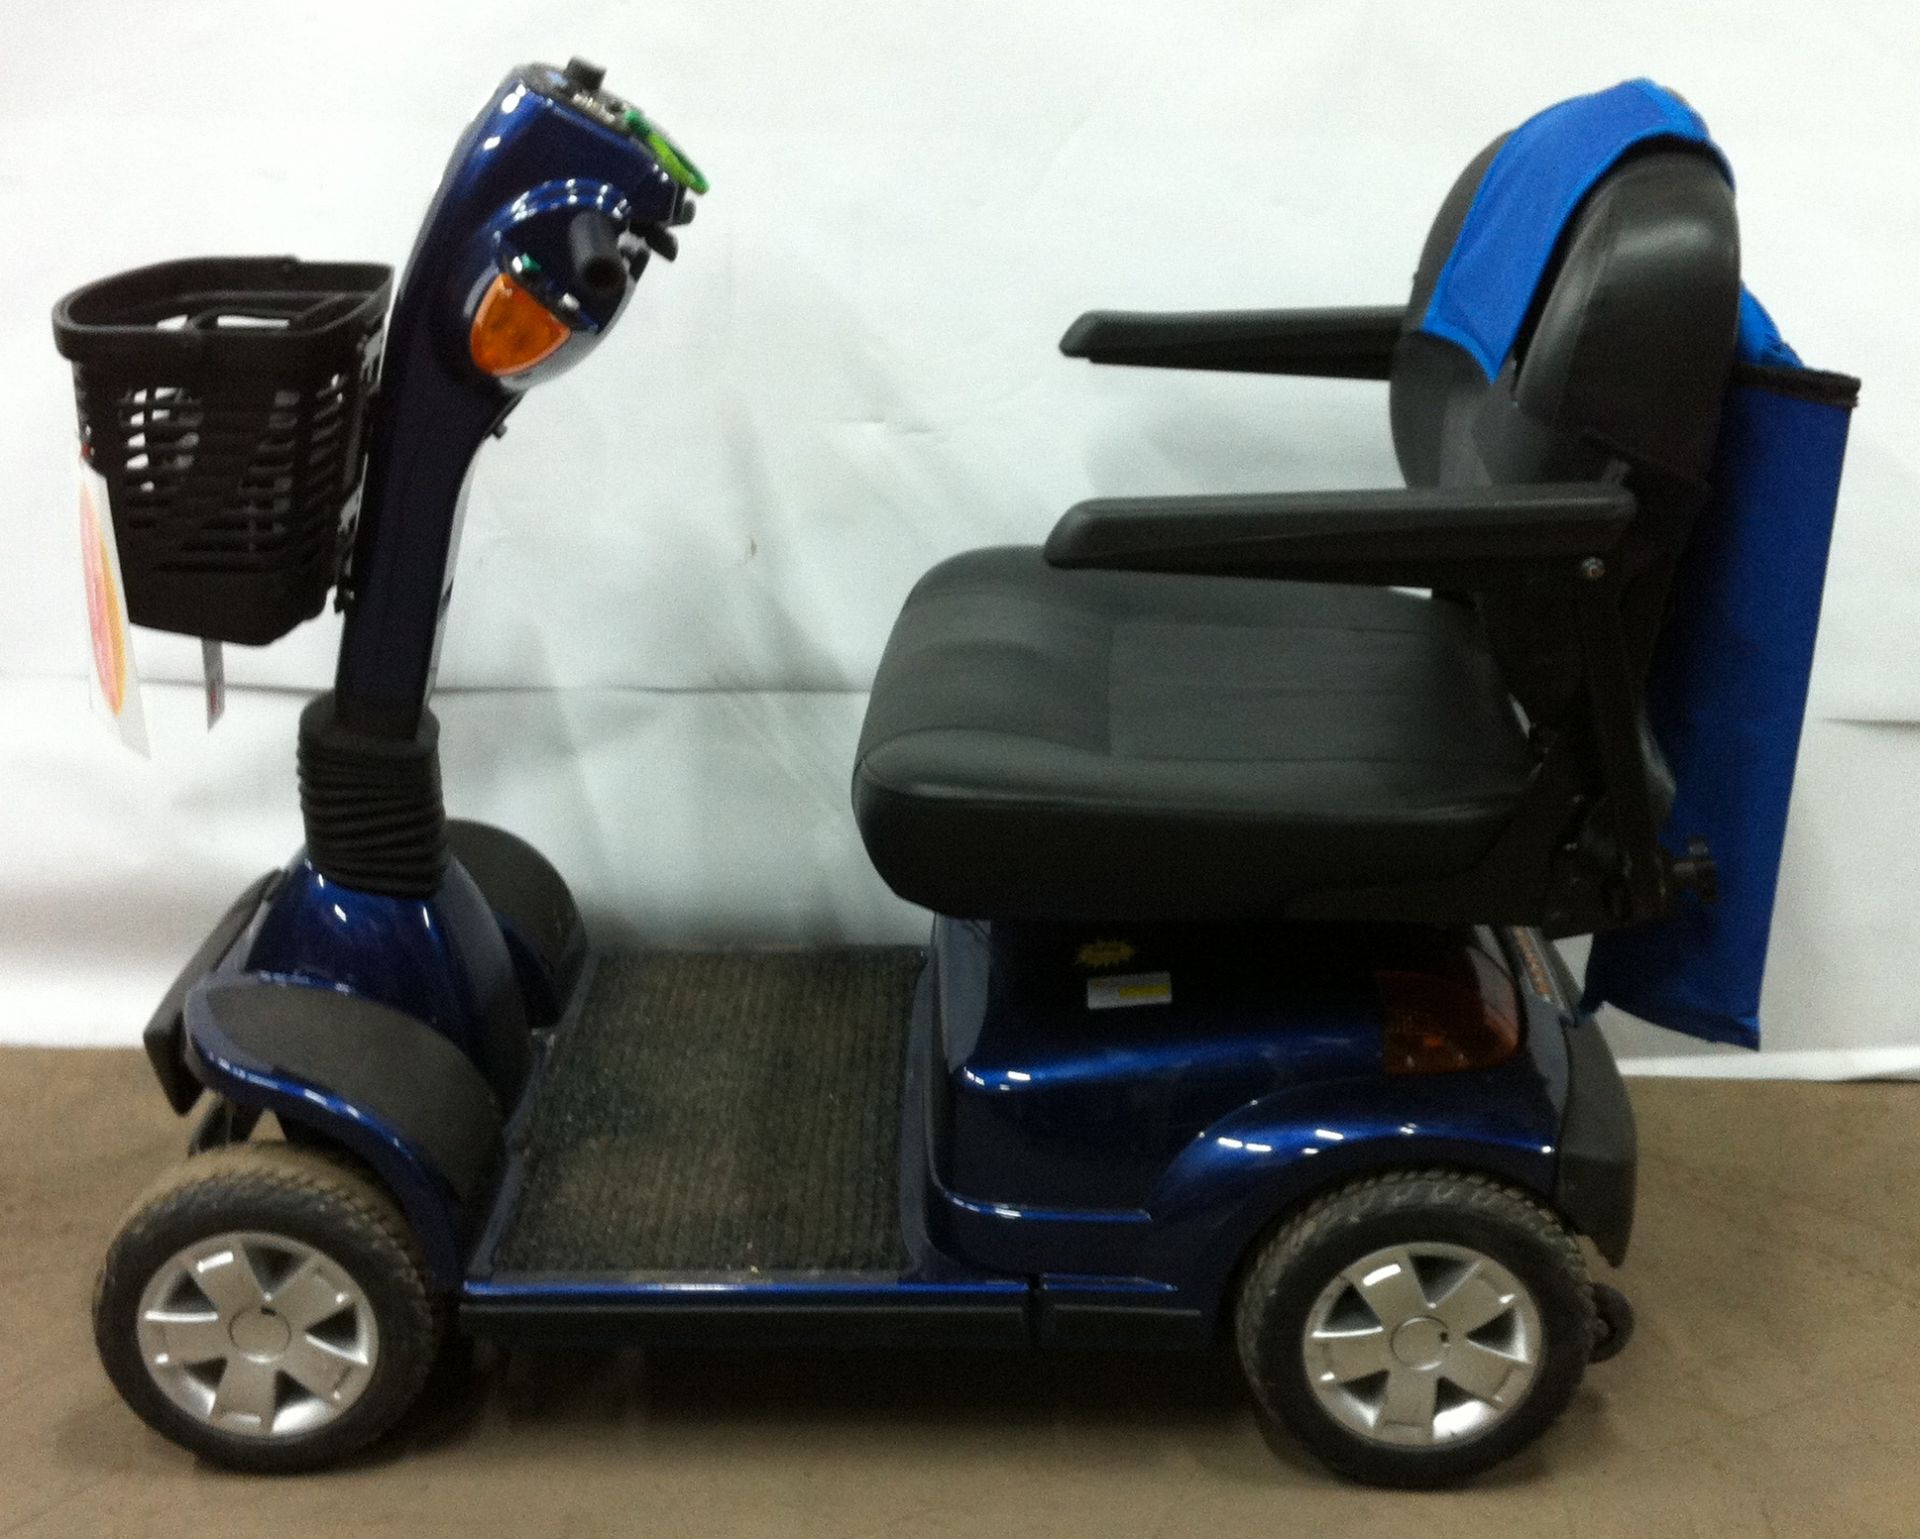 Maxima mobility scooter - Image 3 of 4